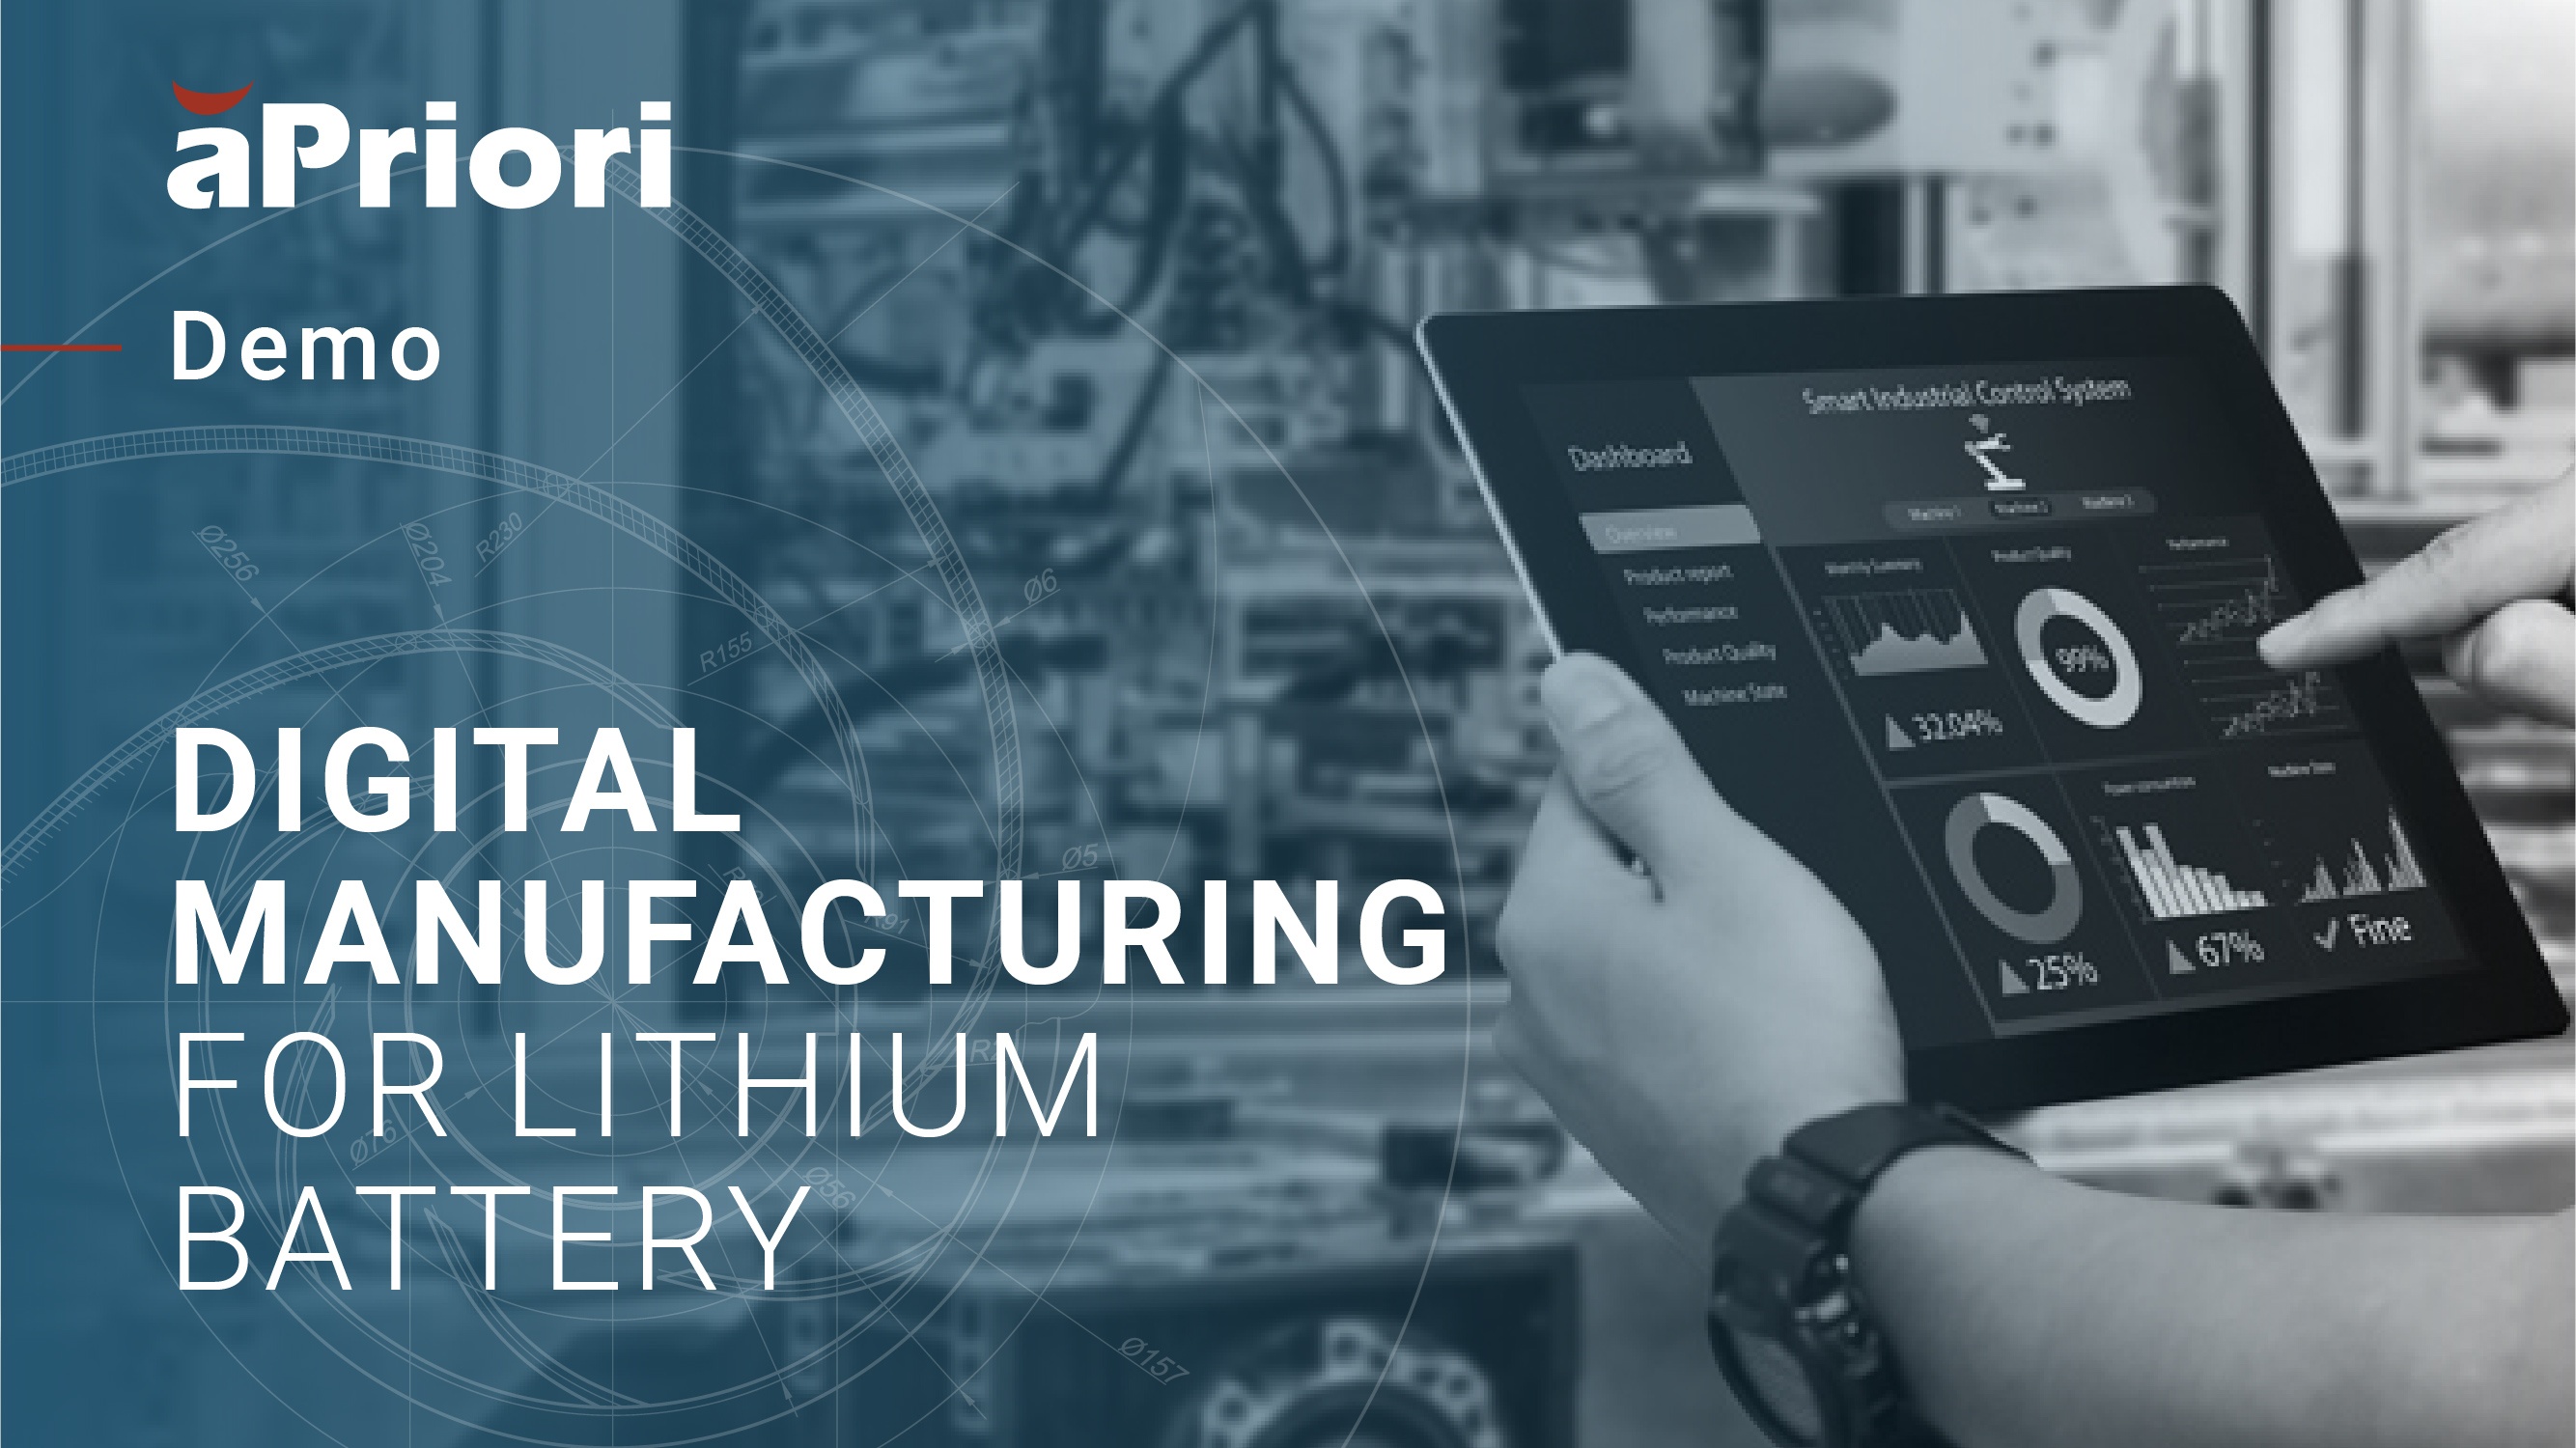 aPriori - Reducing Cost and Time to Market Using Digital Manufacturing Software